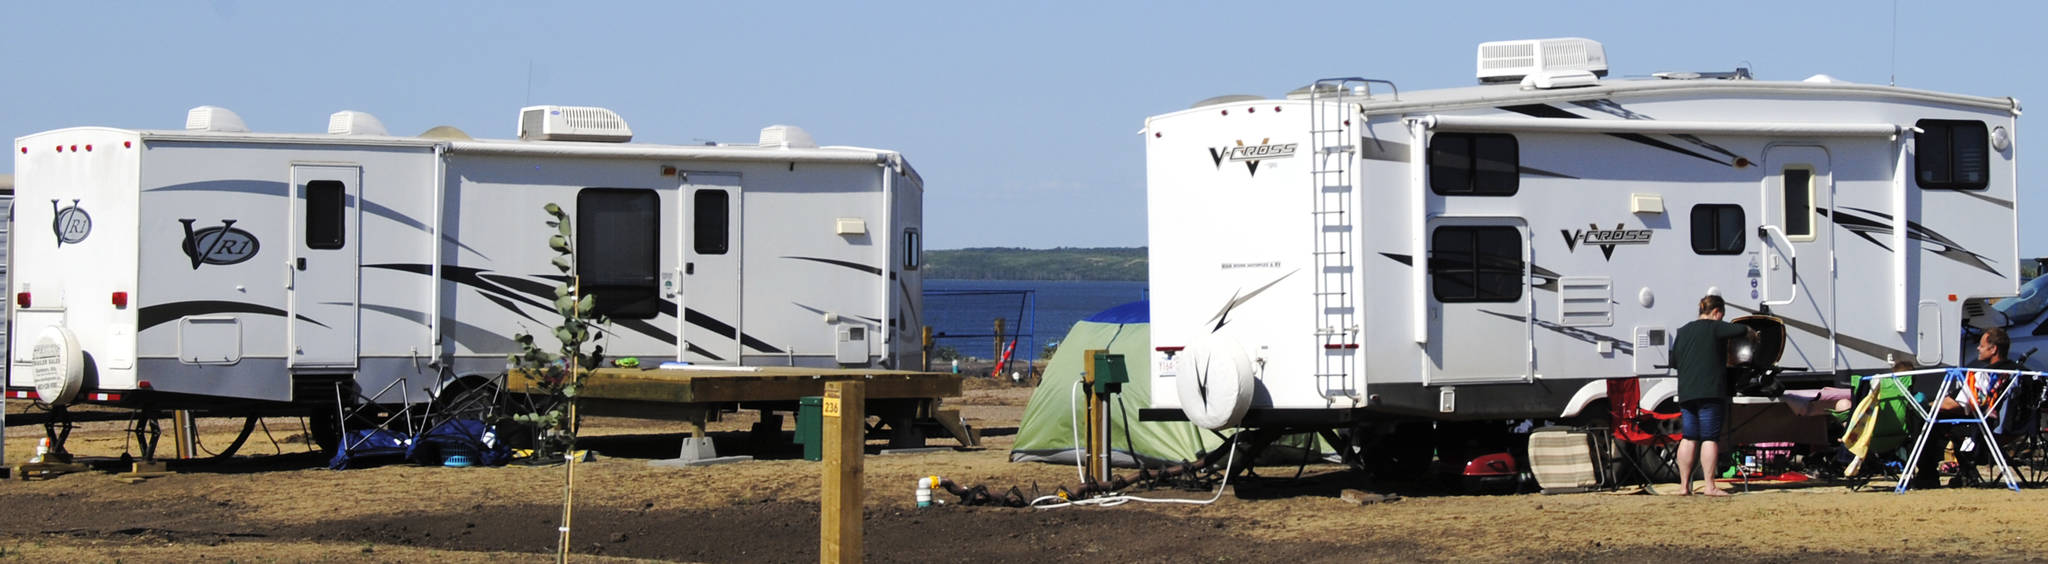 Campers at the Paradise Shores site July 5. (Lisa Joy/Black Press News Service)